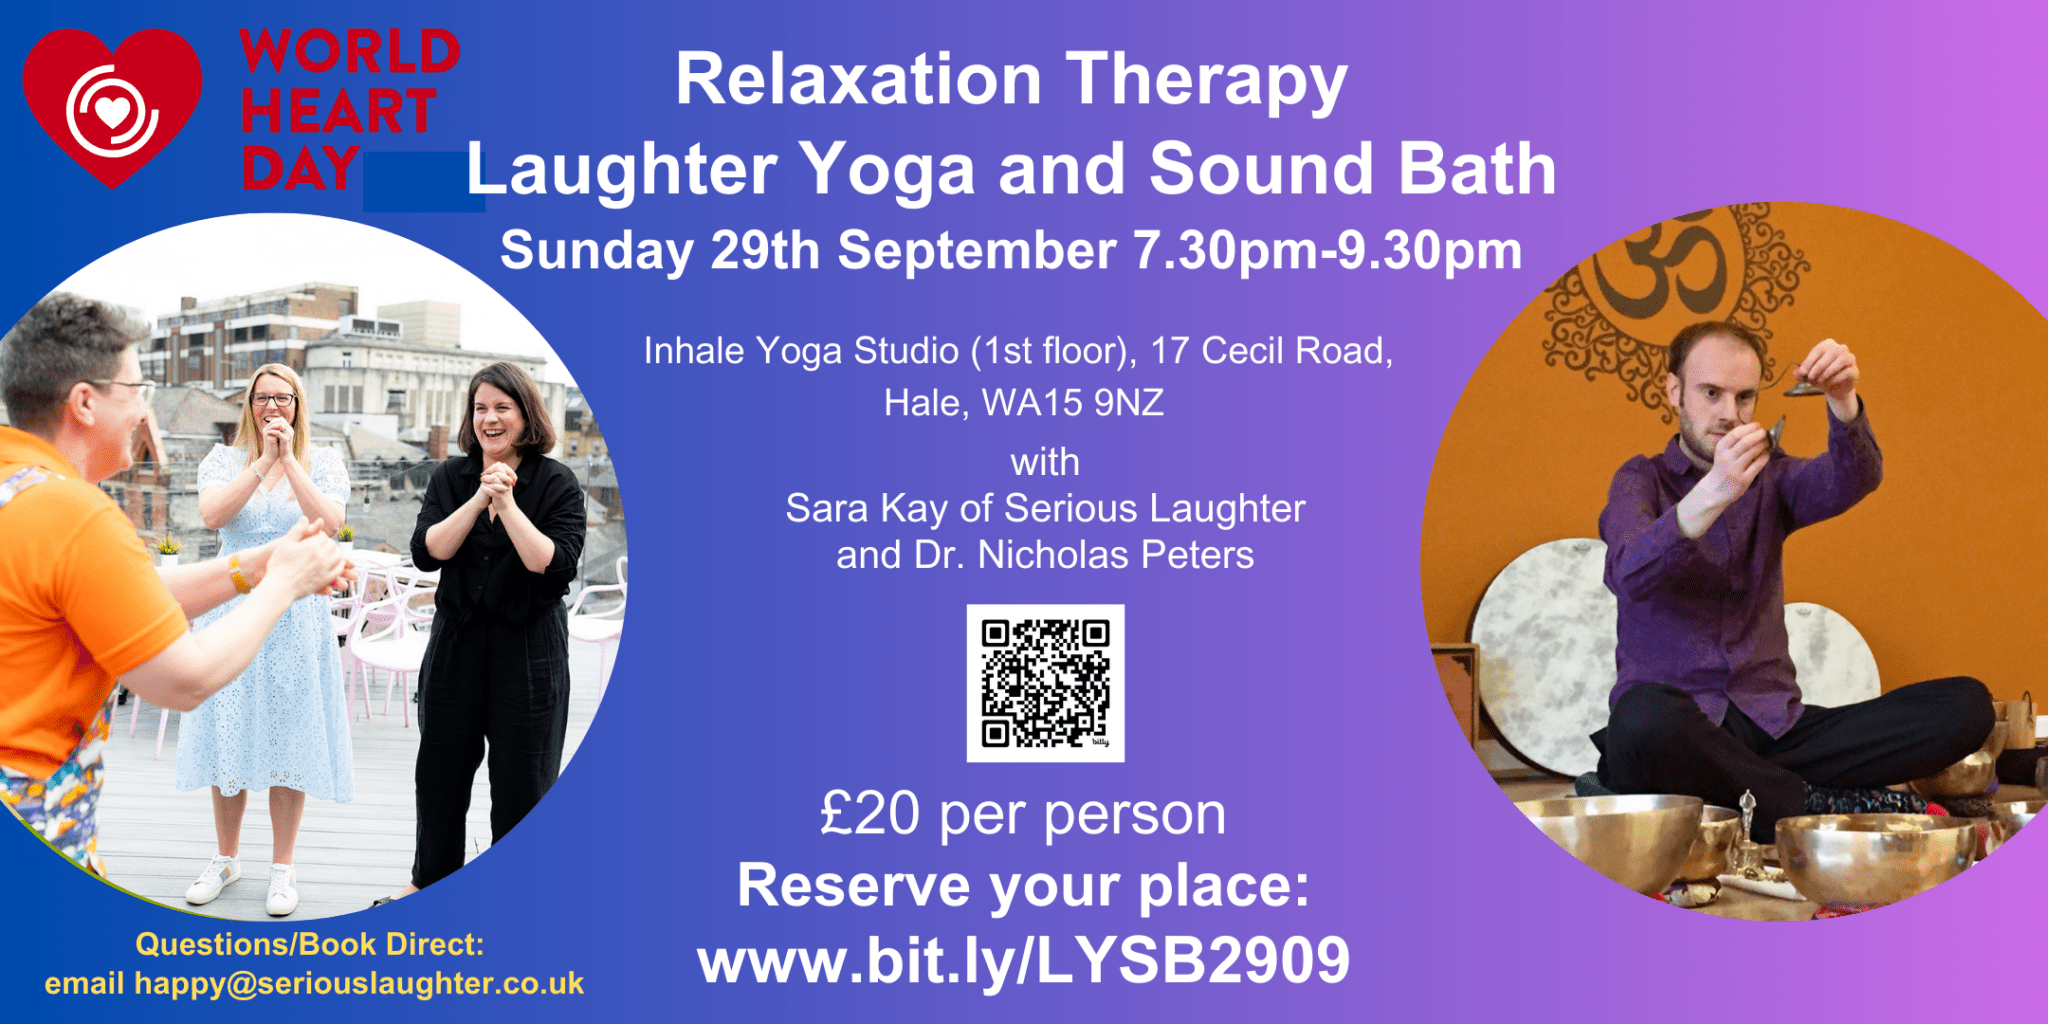 Relaxation Therapy Laughter Yoga